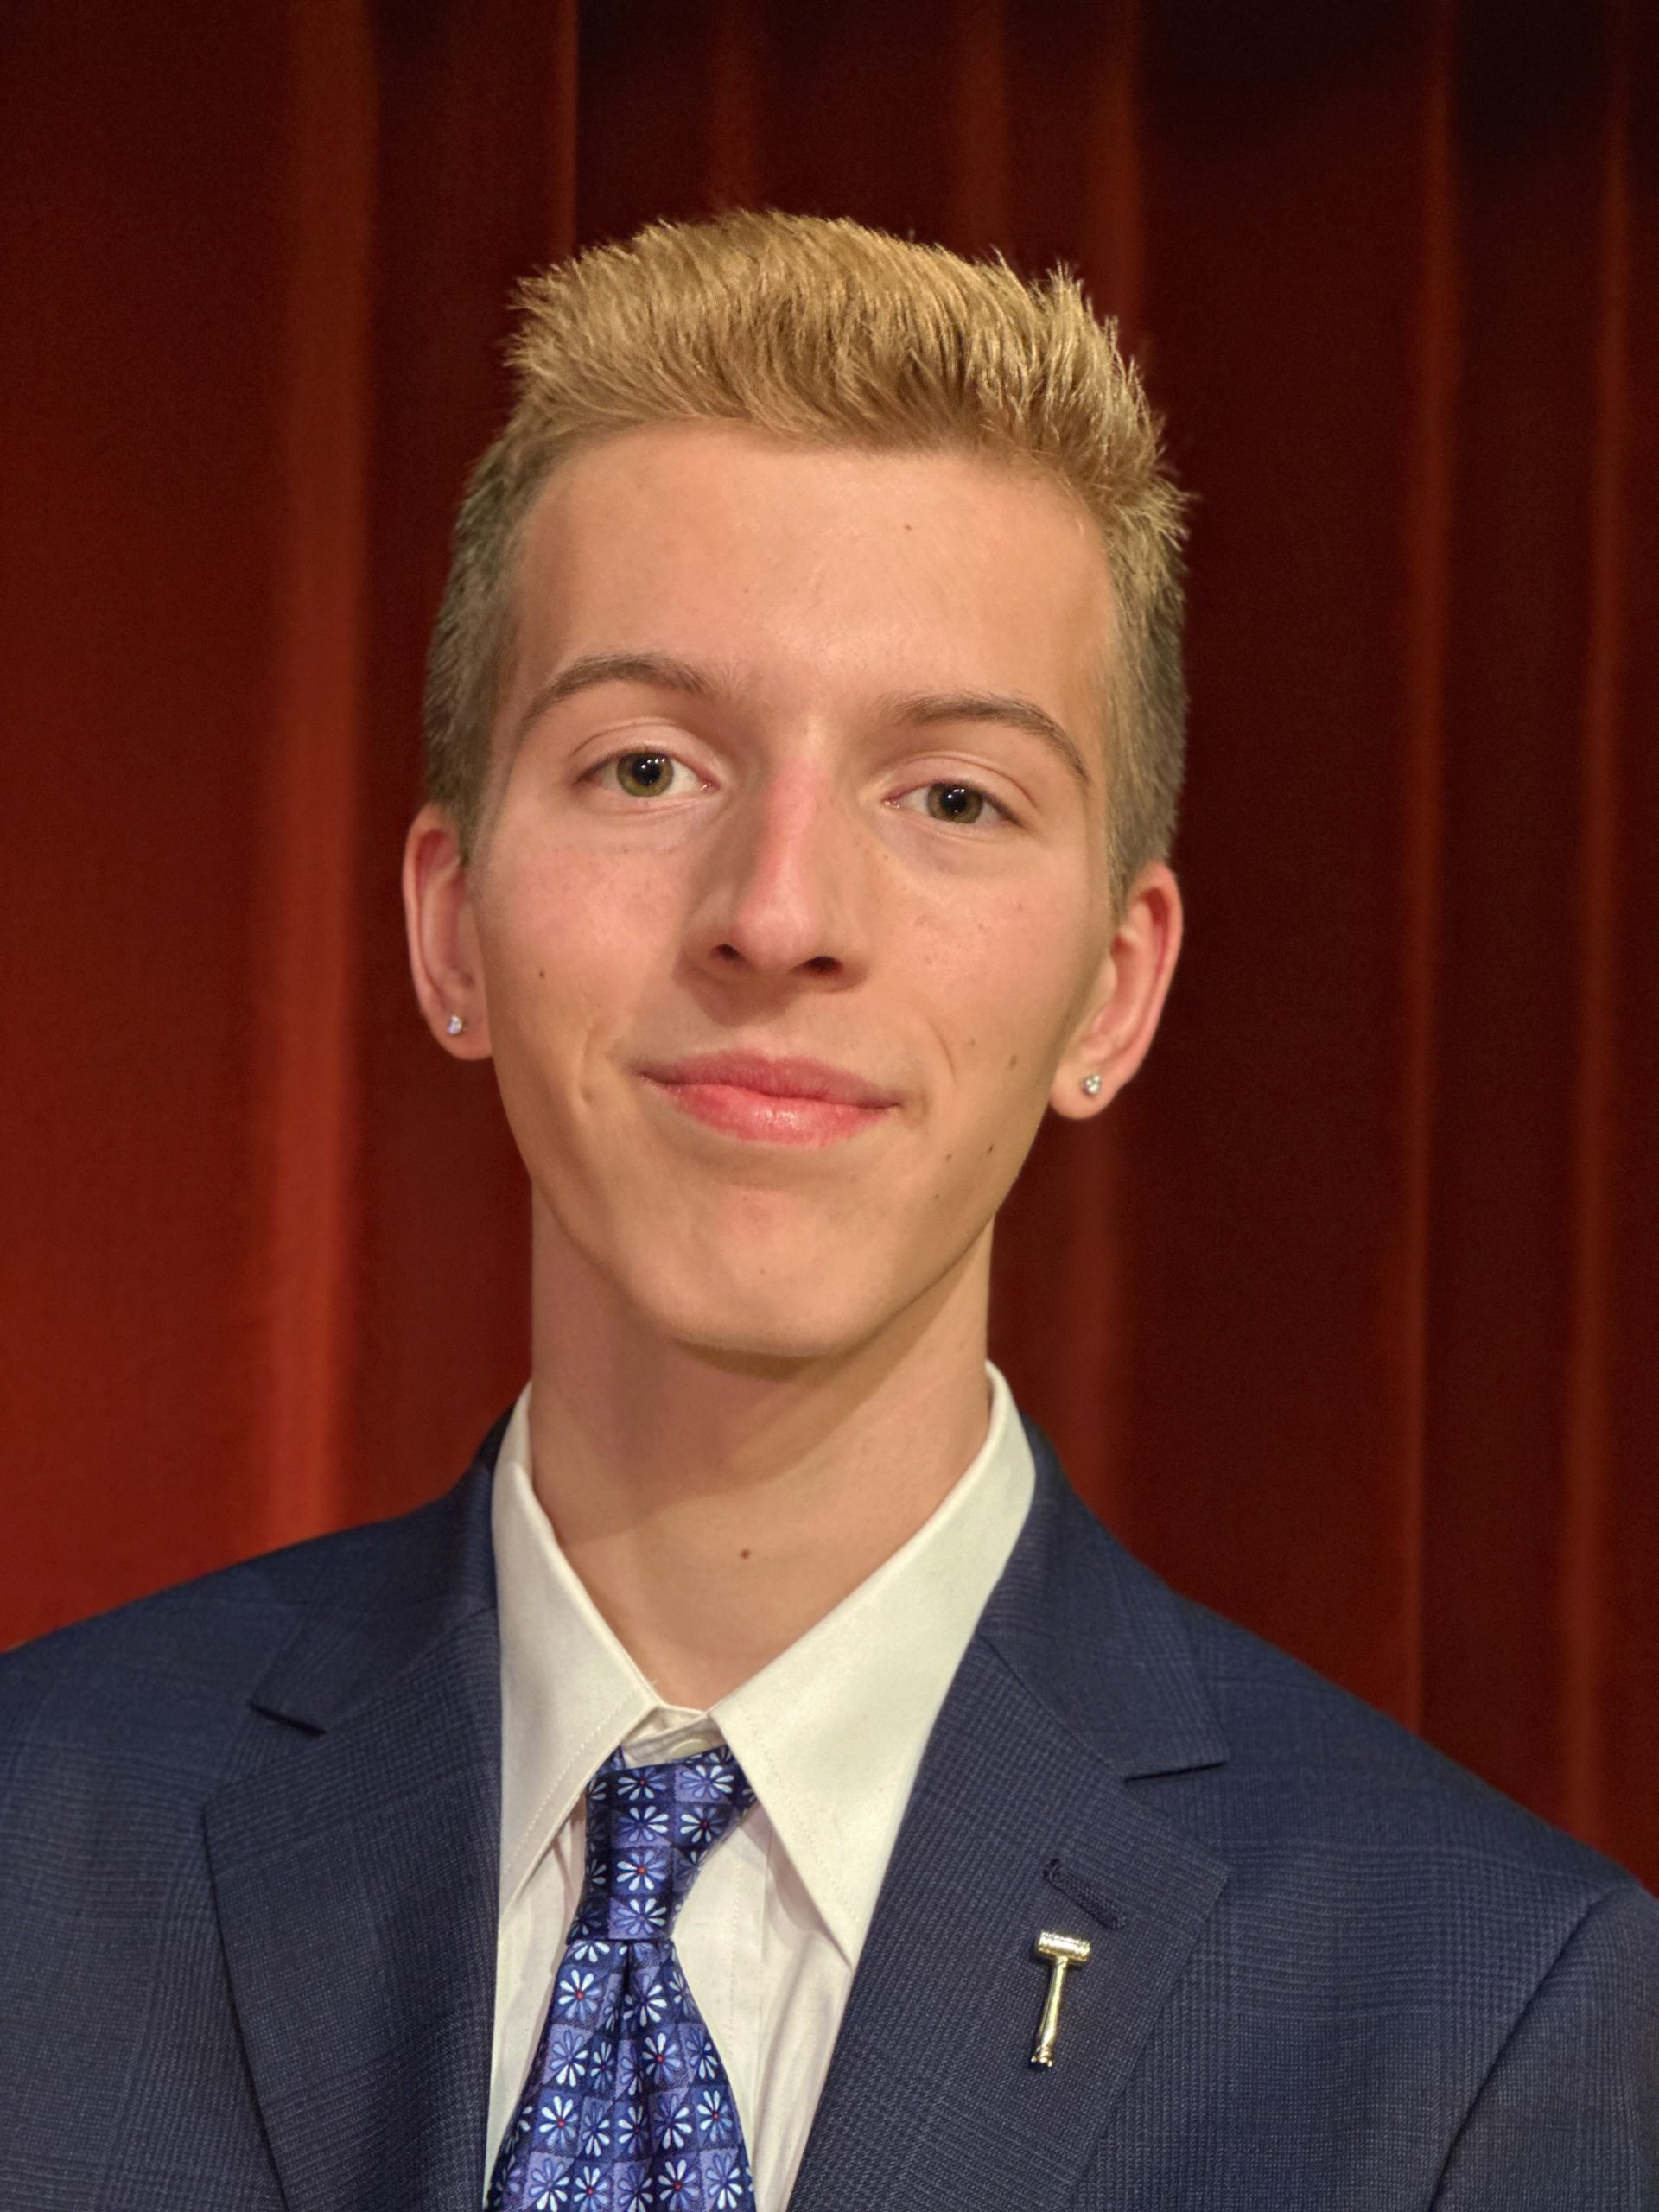 Treasurer-Elect Nico Dorazio was elected at the MCR Board of Education meeting on May 26. I started working with MCR in May of 2022 and have always has a passion a positive passion for creating change and MCR is a great way for me to pursue that, Dorazio said.